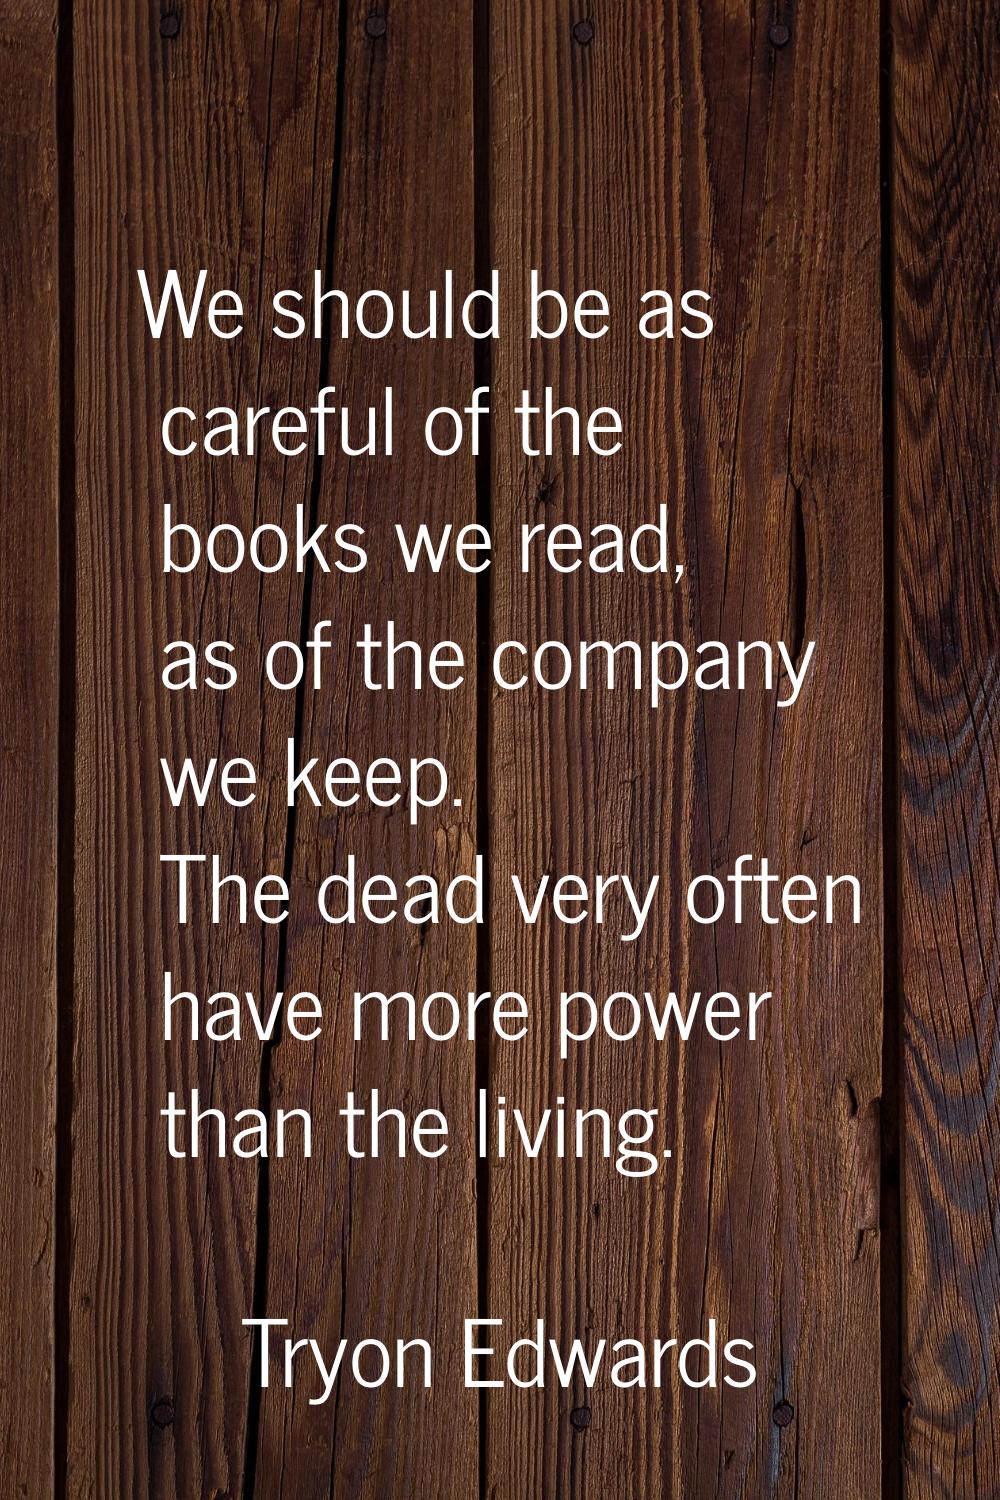 We should be as careful of the books we read, as of the company we keep. The dead very often have m